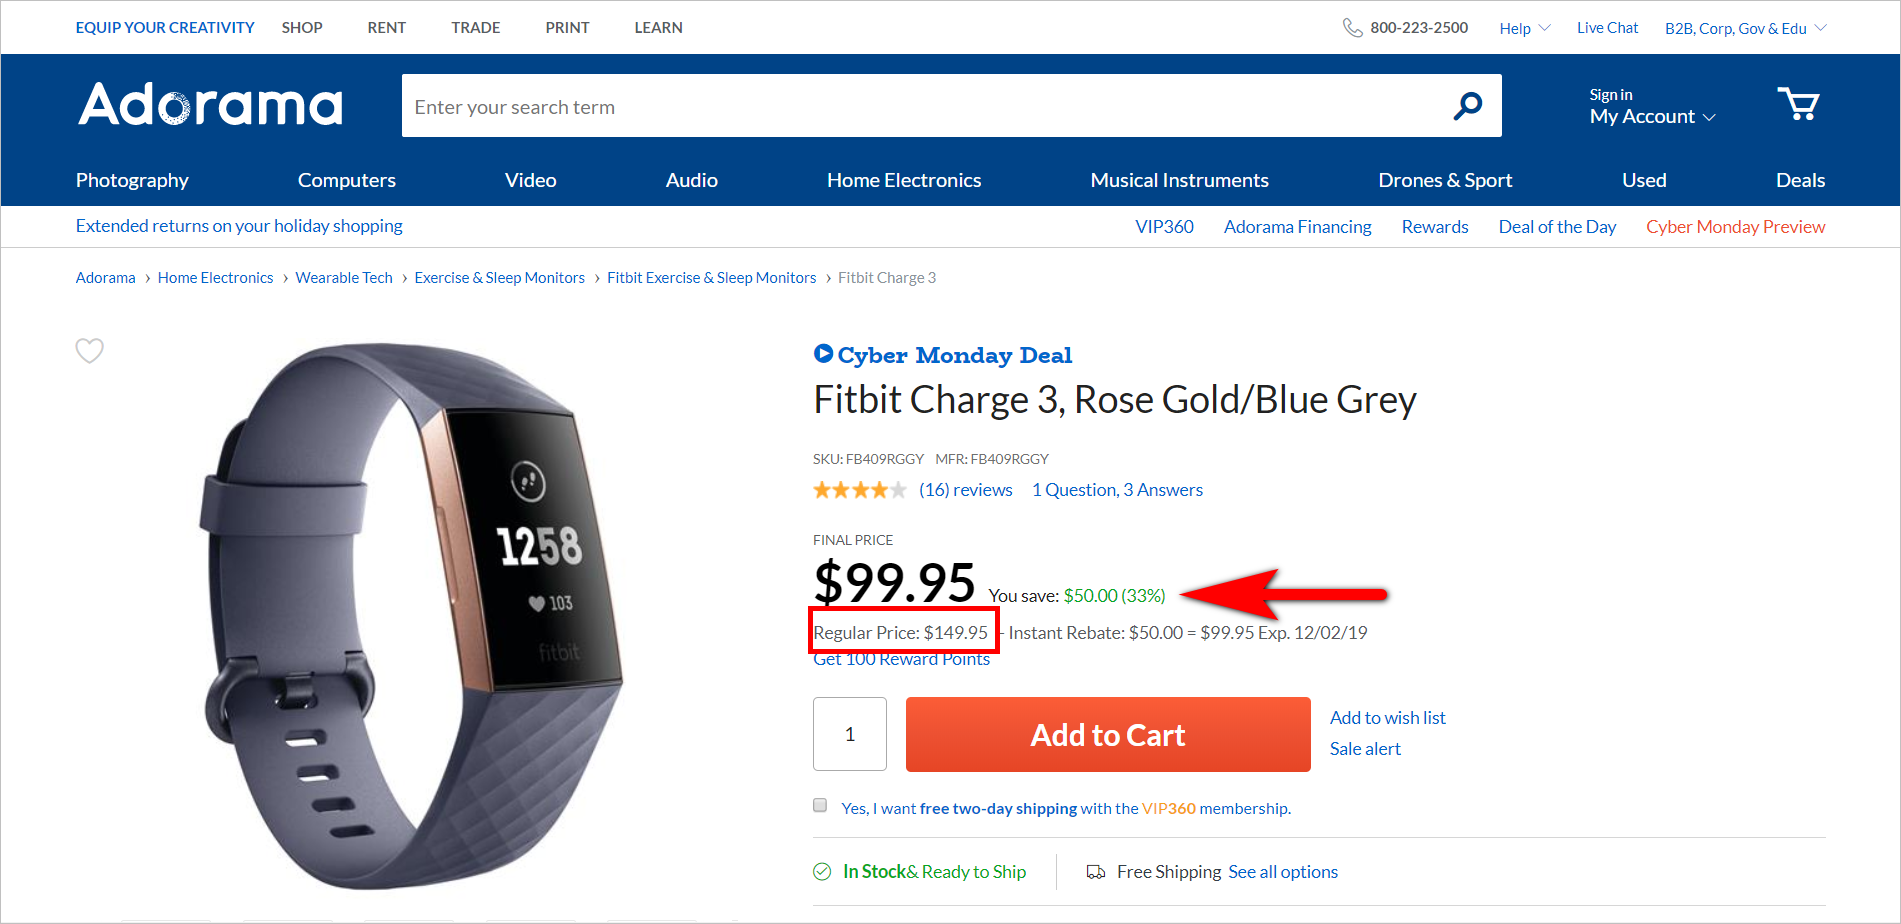 the rule of 100 - more than $100 example : adorama.com product detail page for fitbit charge 3 with a regular price of $149.95 and a sale price of $99.95. the pdp shows that the customer saves $50.00 or 33%